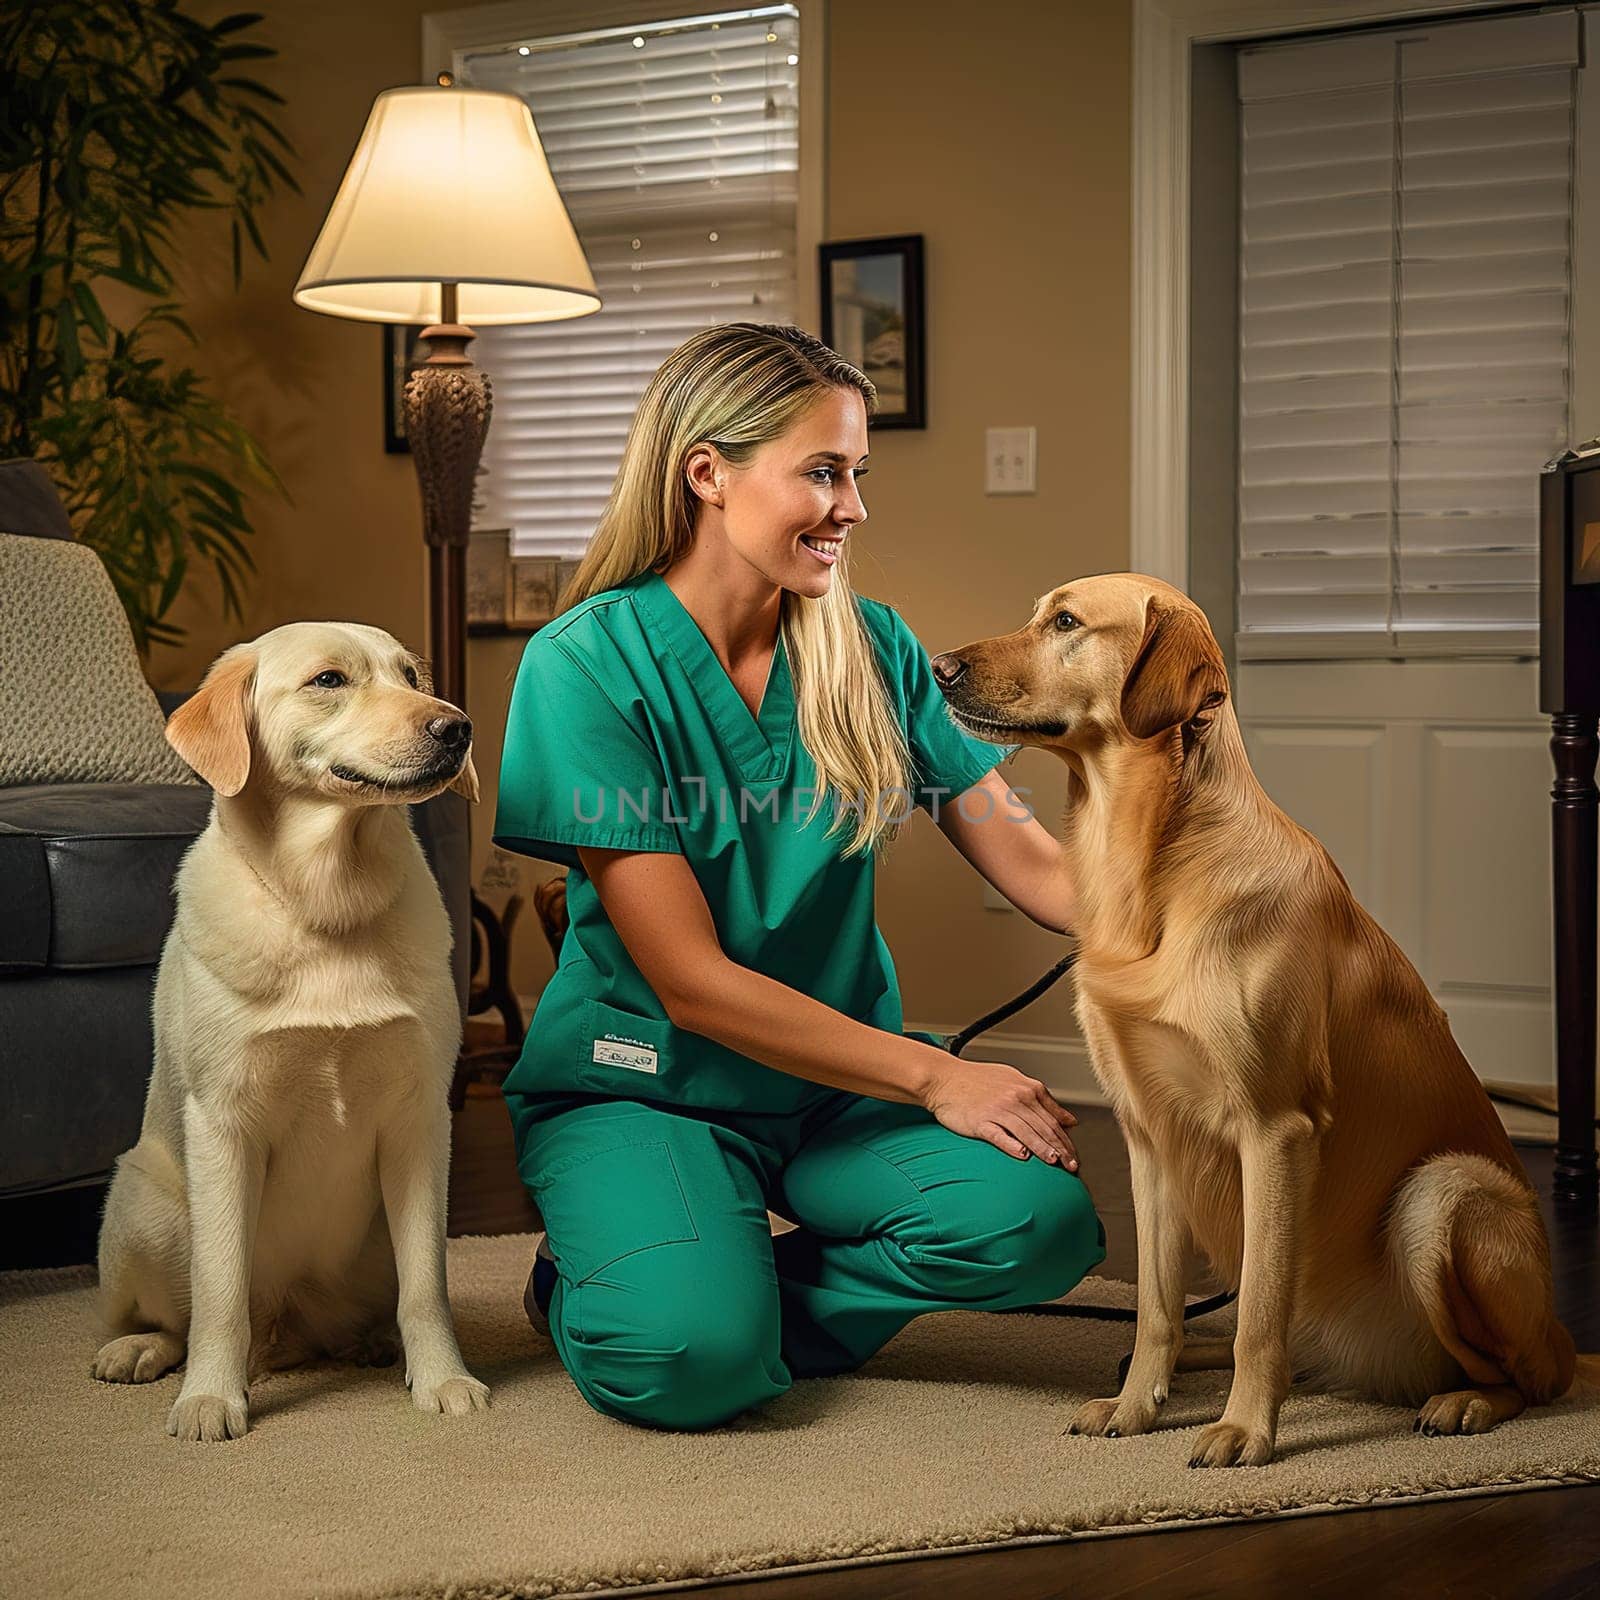 A happy female veterinarian examines the dogs in the room